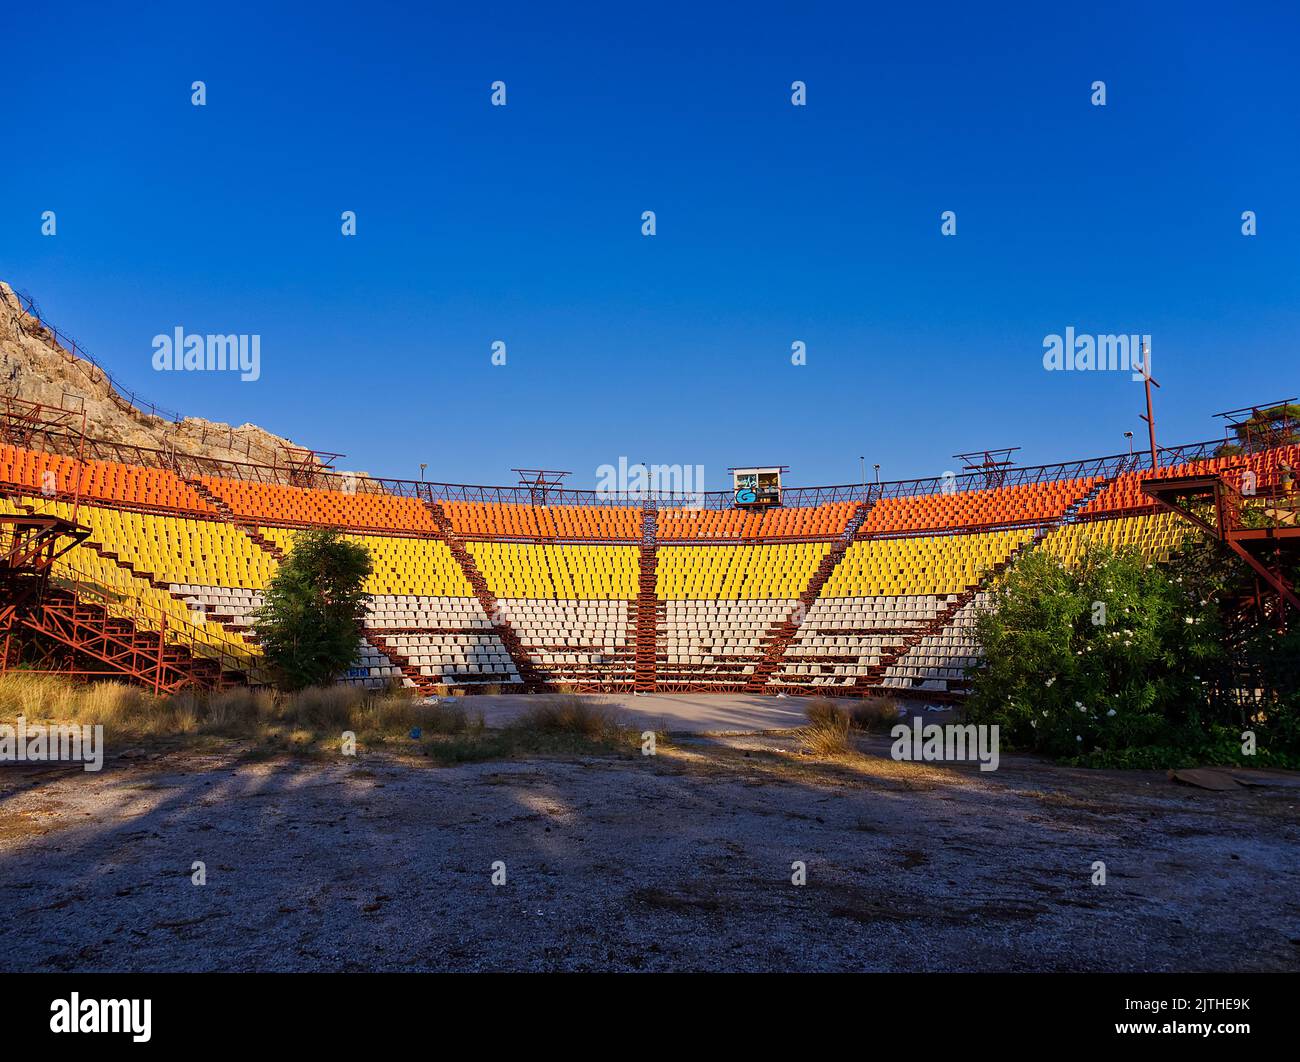 Abandoned theatre view before sunset Stock Photo